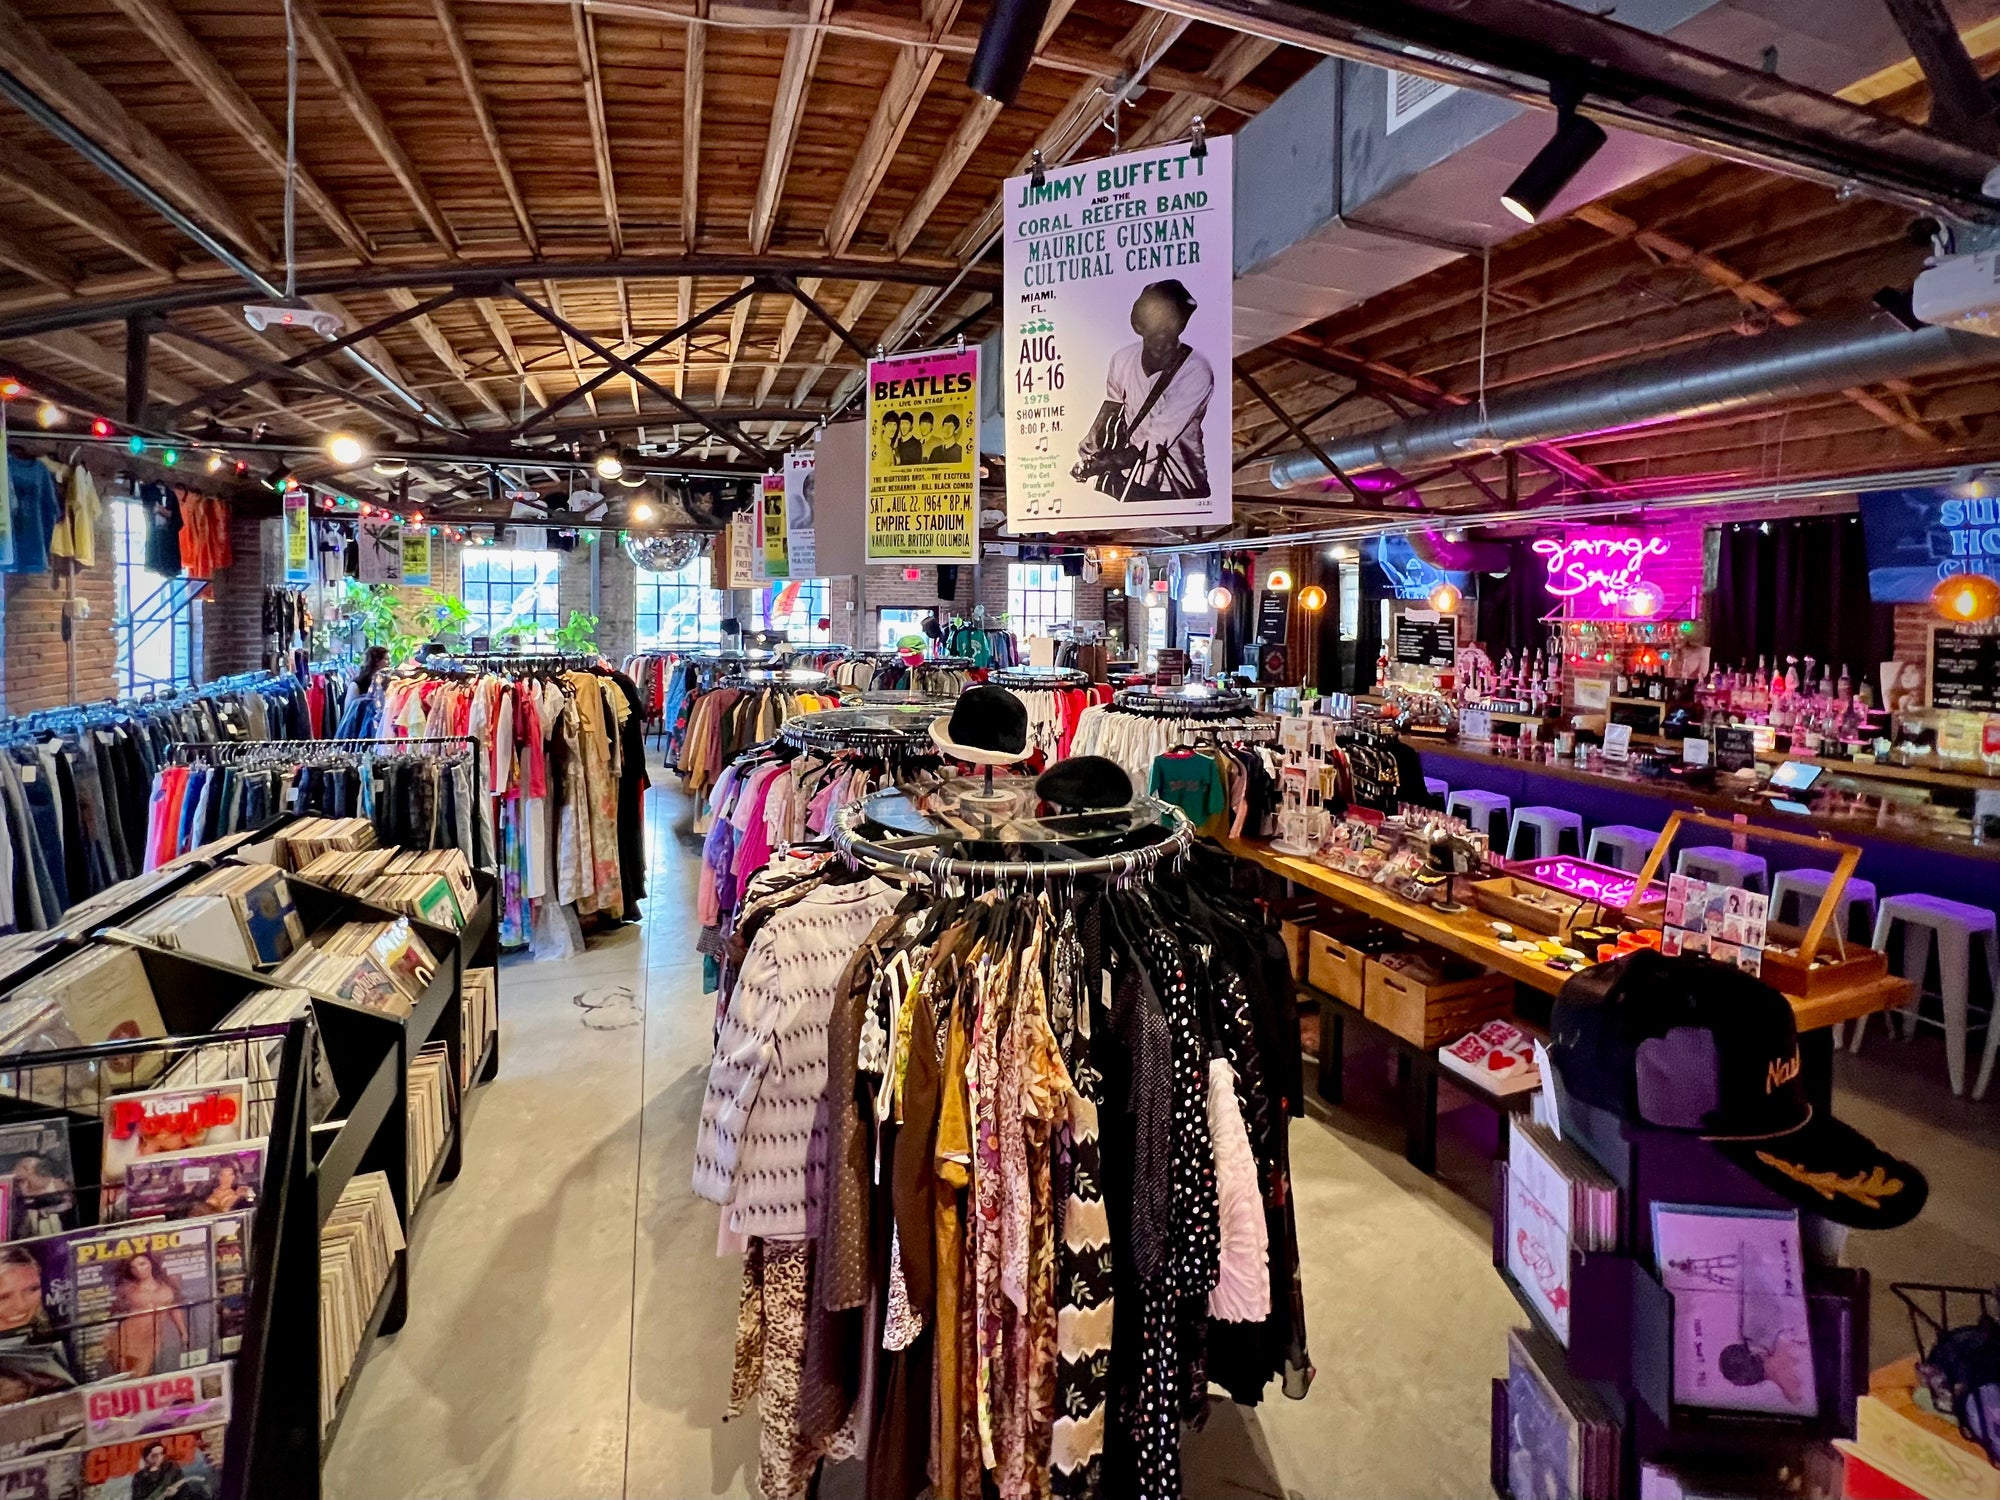 Discover Vintage Fashion, Tacos, and More at Garage Sale